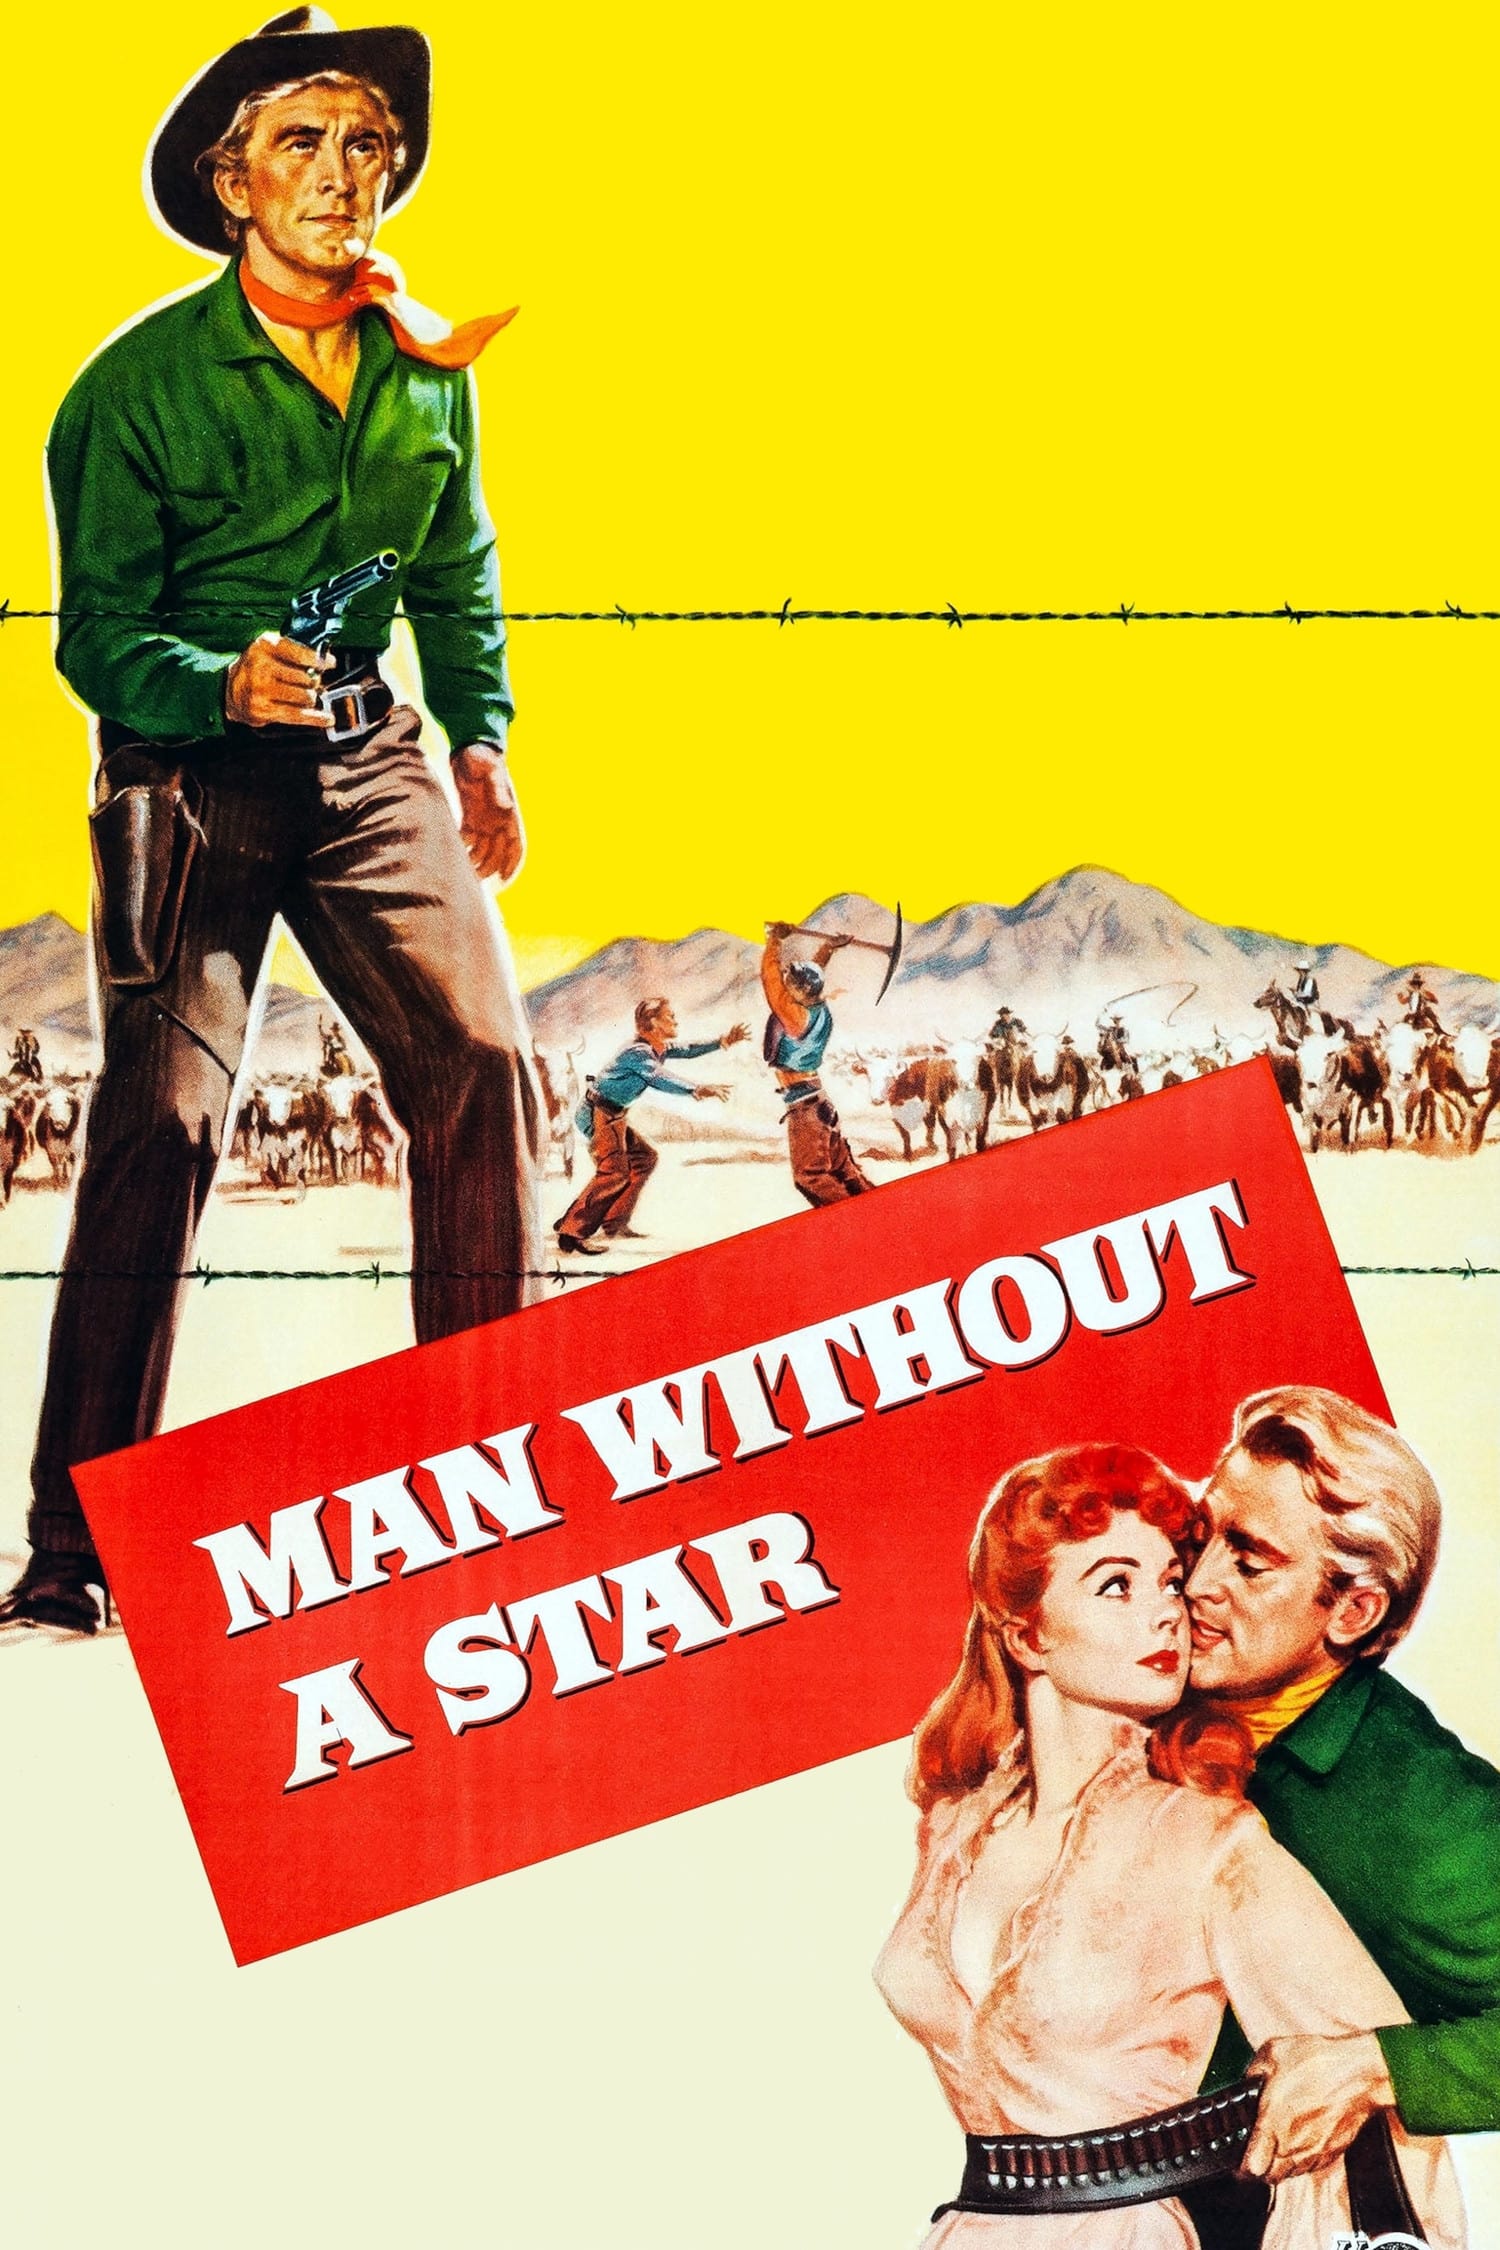 Man Without a Star (1955)